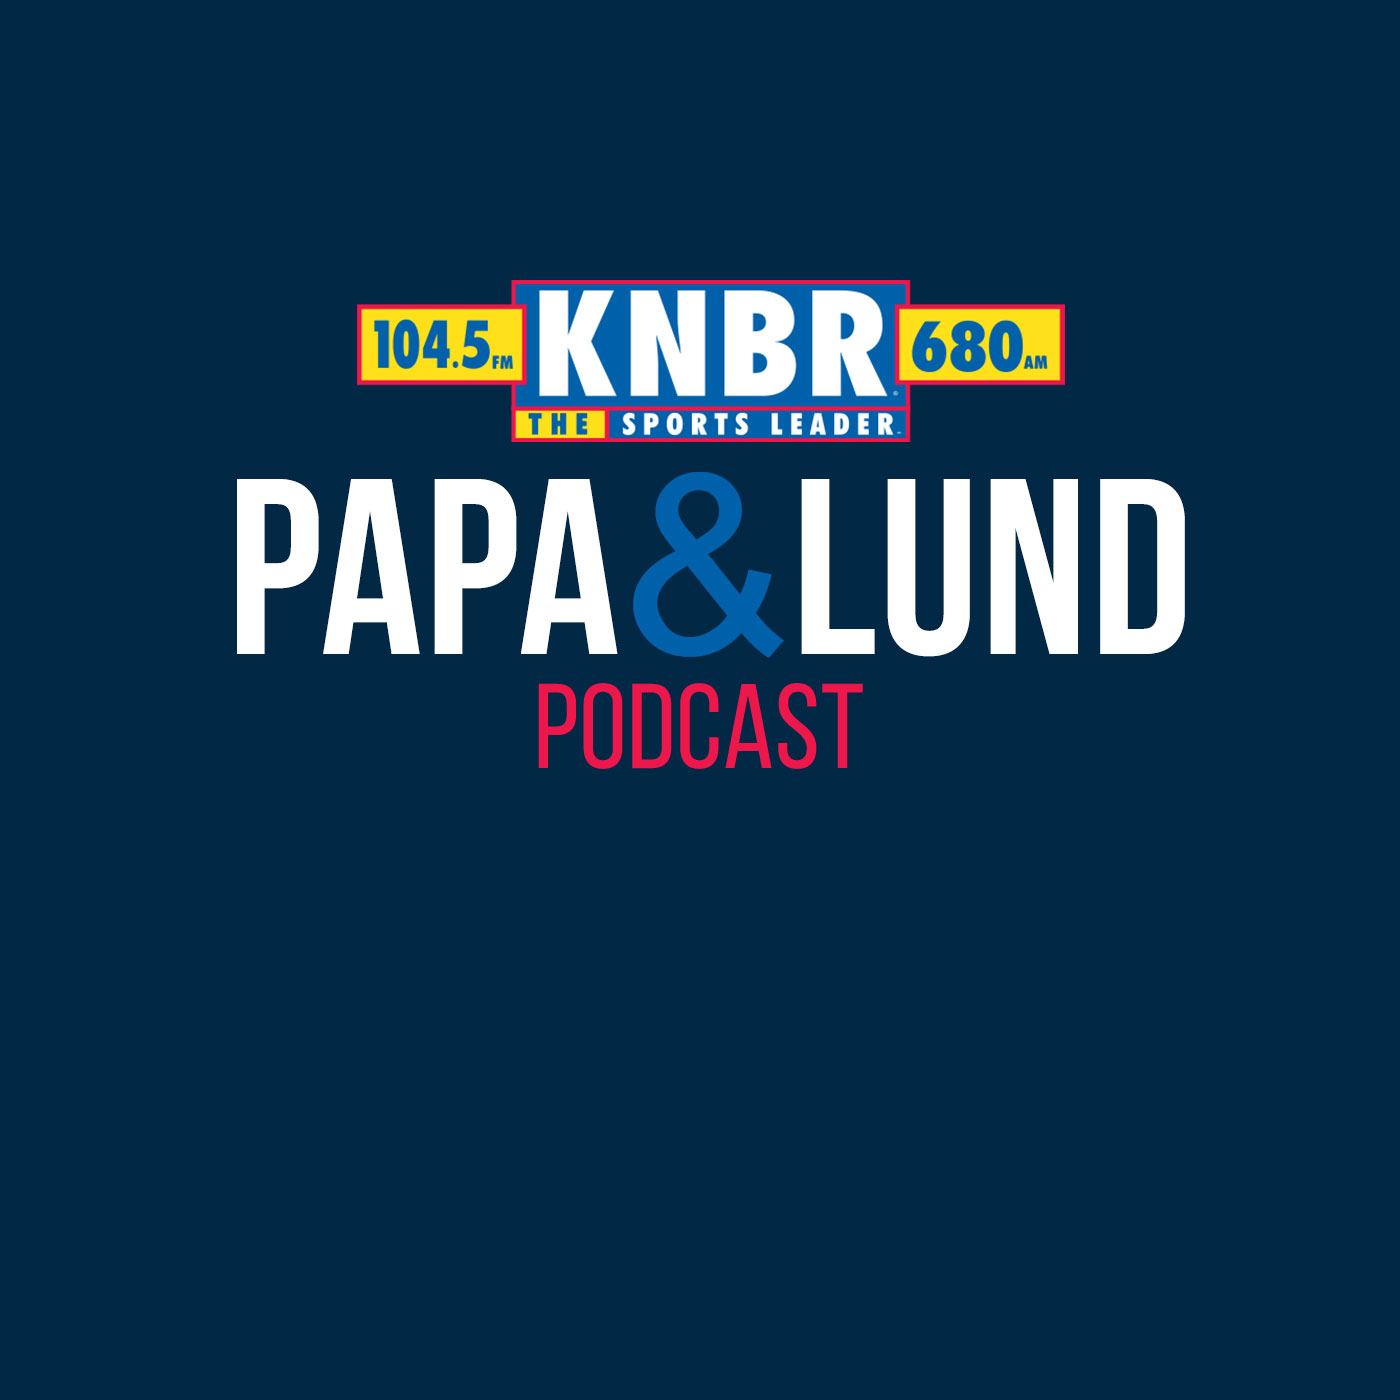 10-9 David Lombardi joins Papa & Lund to discuss how dominate the 49ers defense is and what separates them from the rest of the NFL